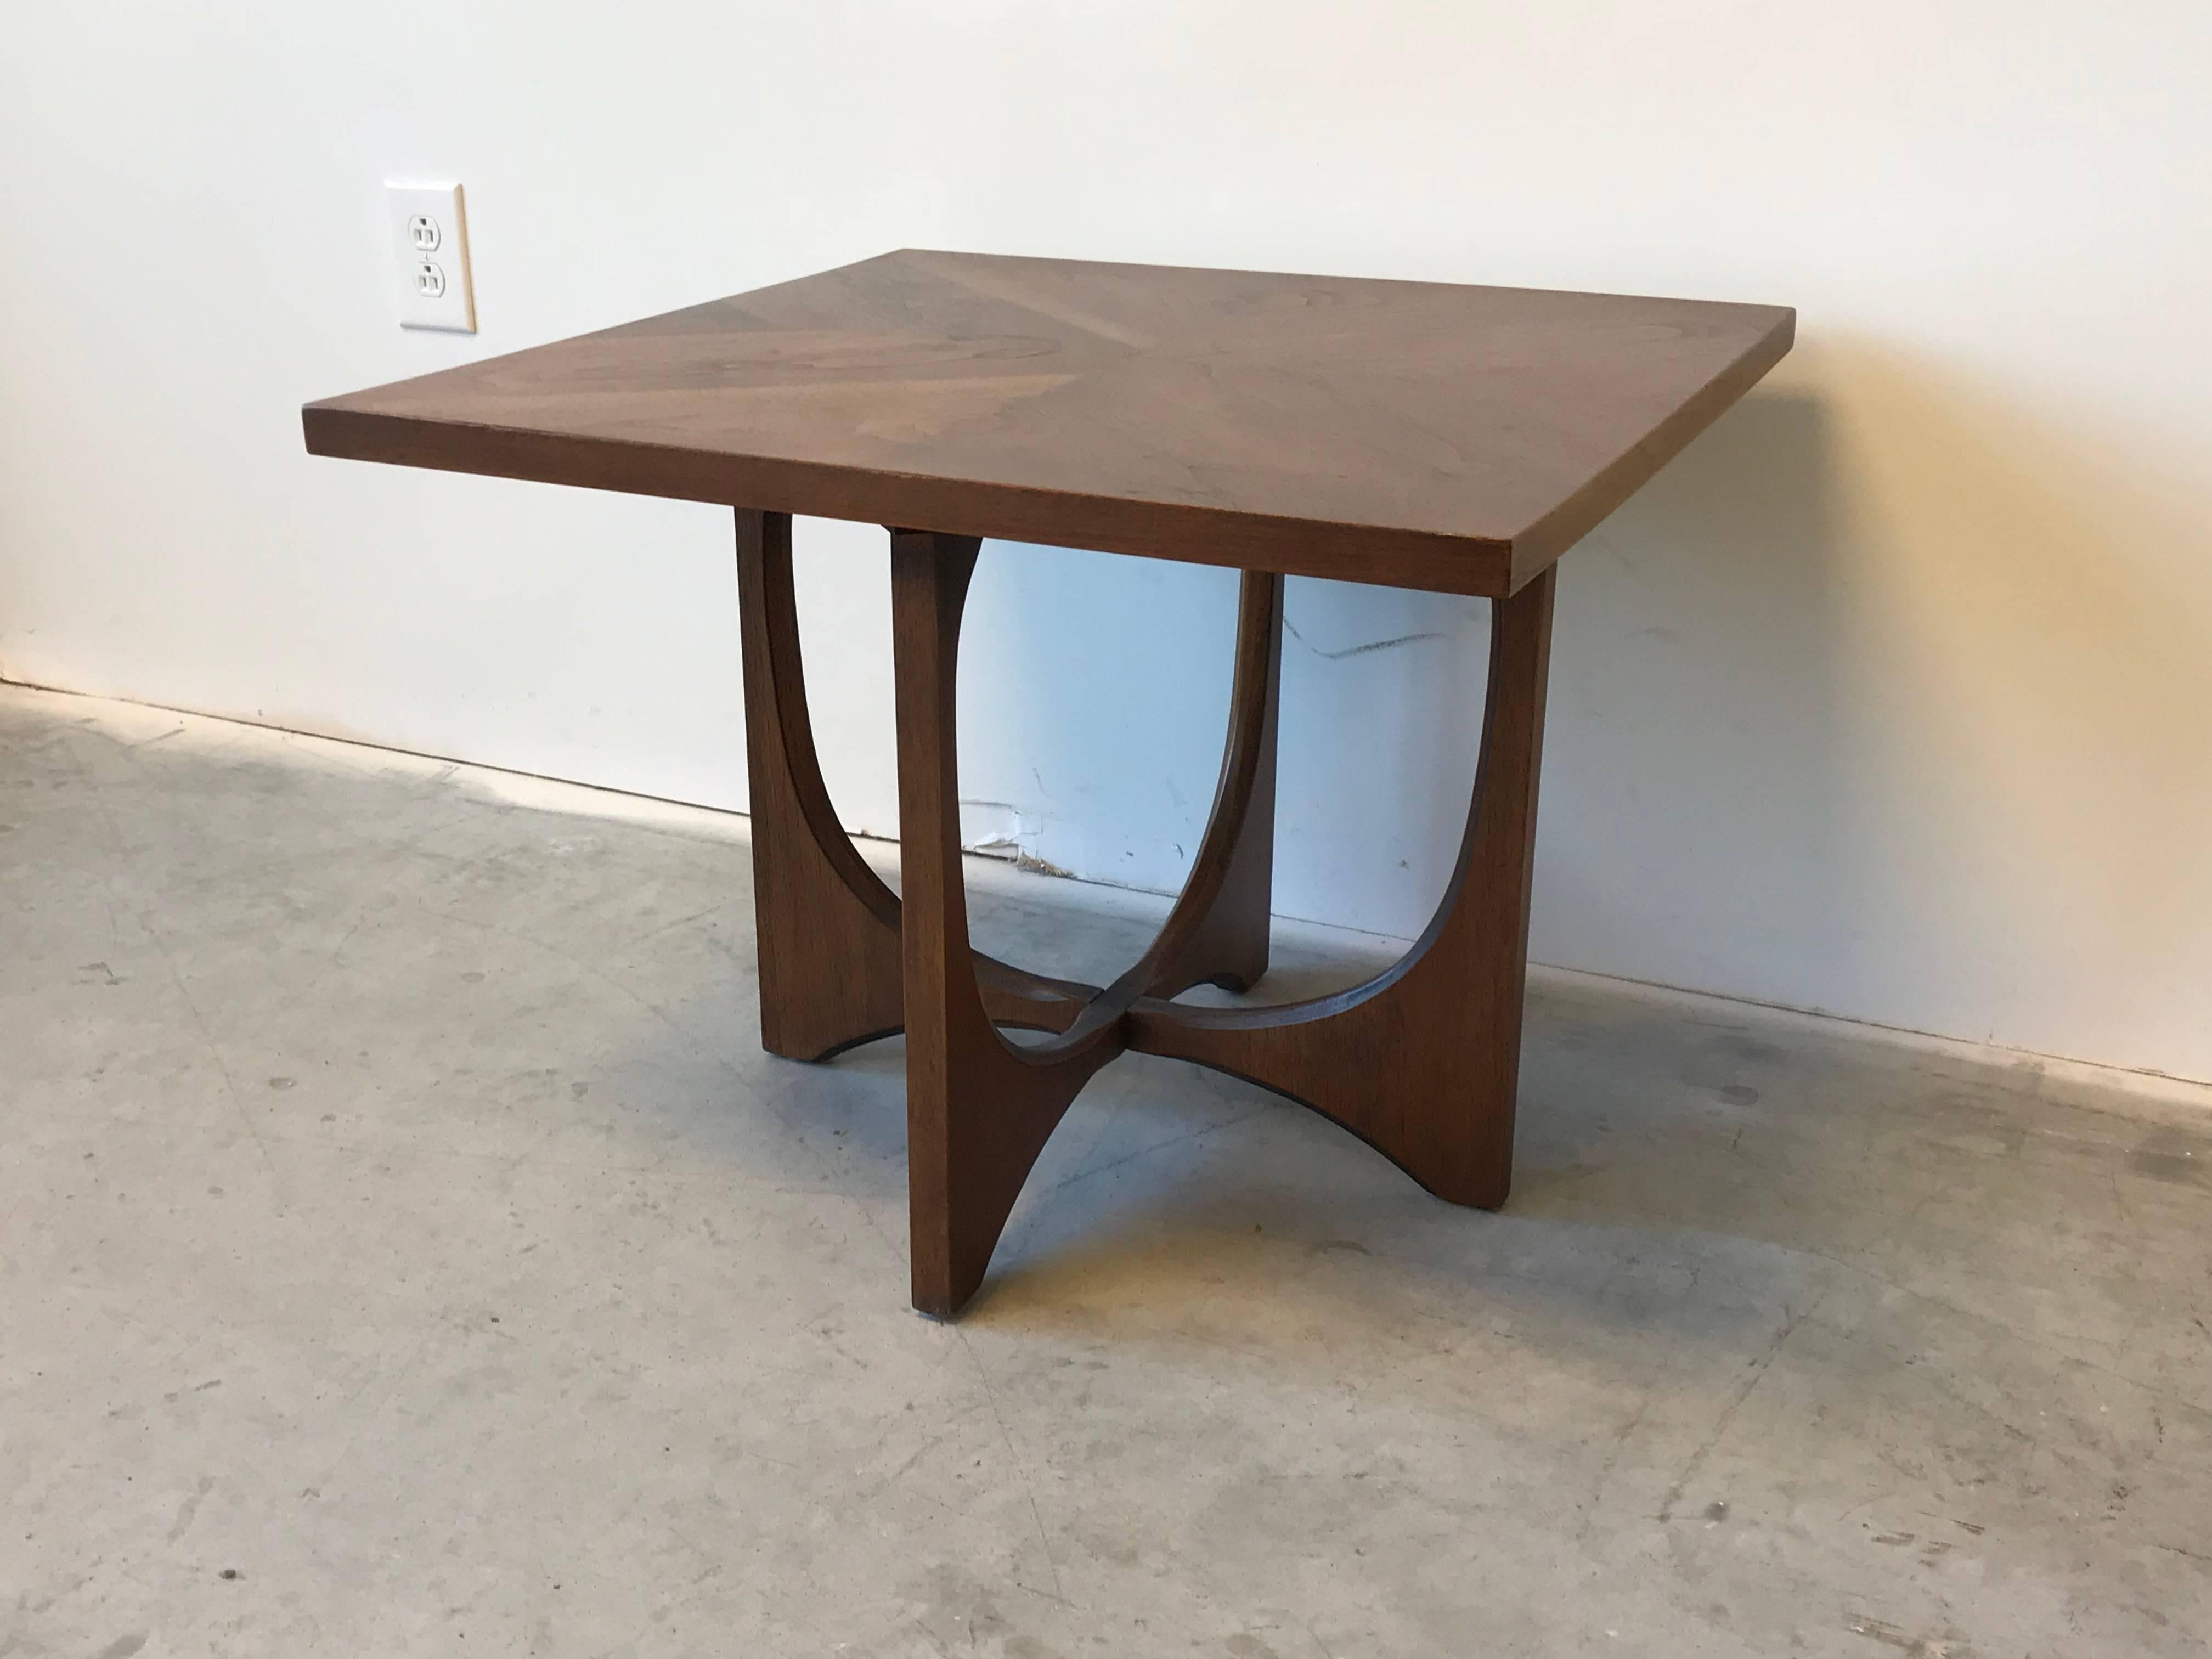 Offered is a stunning, 1960s Broyhill Brasilia walnut side table. Introduced by Broyhill in the 1960s, the Brasilia collections signature lines and waves were inspired by the distinct architecture of the city of Brasilia, the capital of Brazil.
    